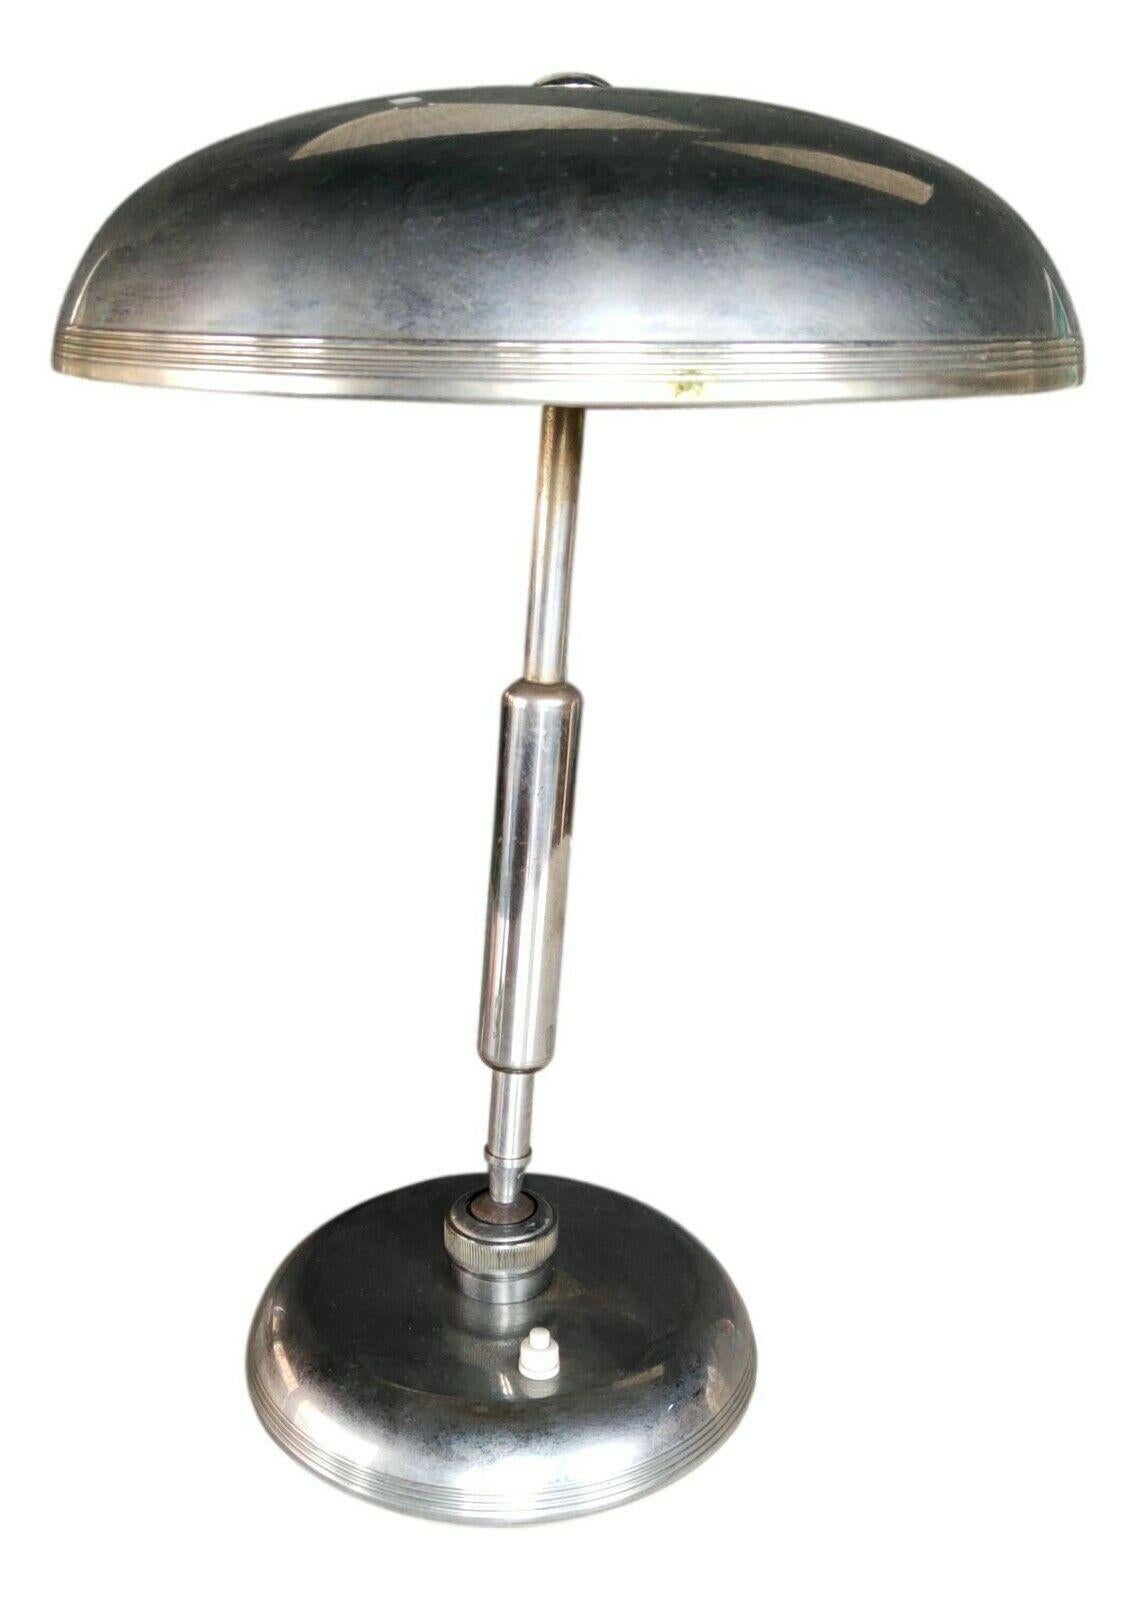 Iconic original table lamp produced by Lumi Milano based on a design by oscar torlasco , published several times on all specialized sites

made of metal, with base and diffuser oscillating in all positions, measuring 43 cm in height, diameter of